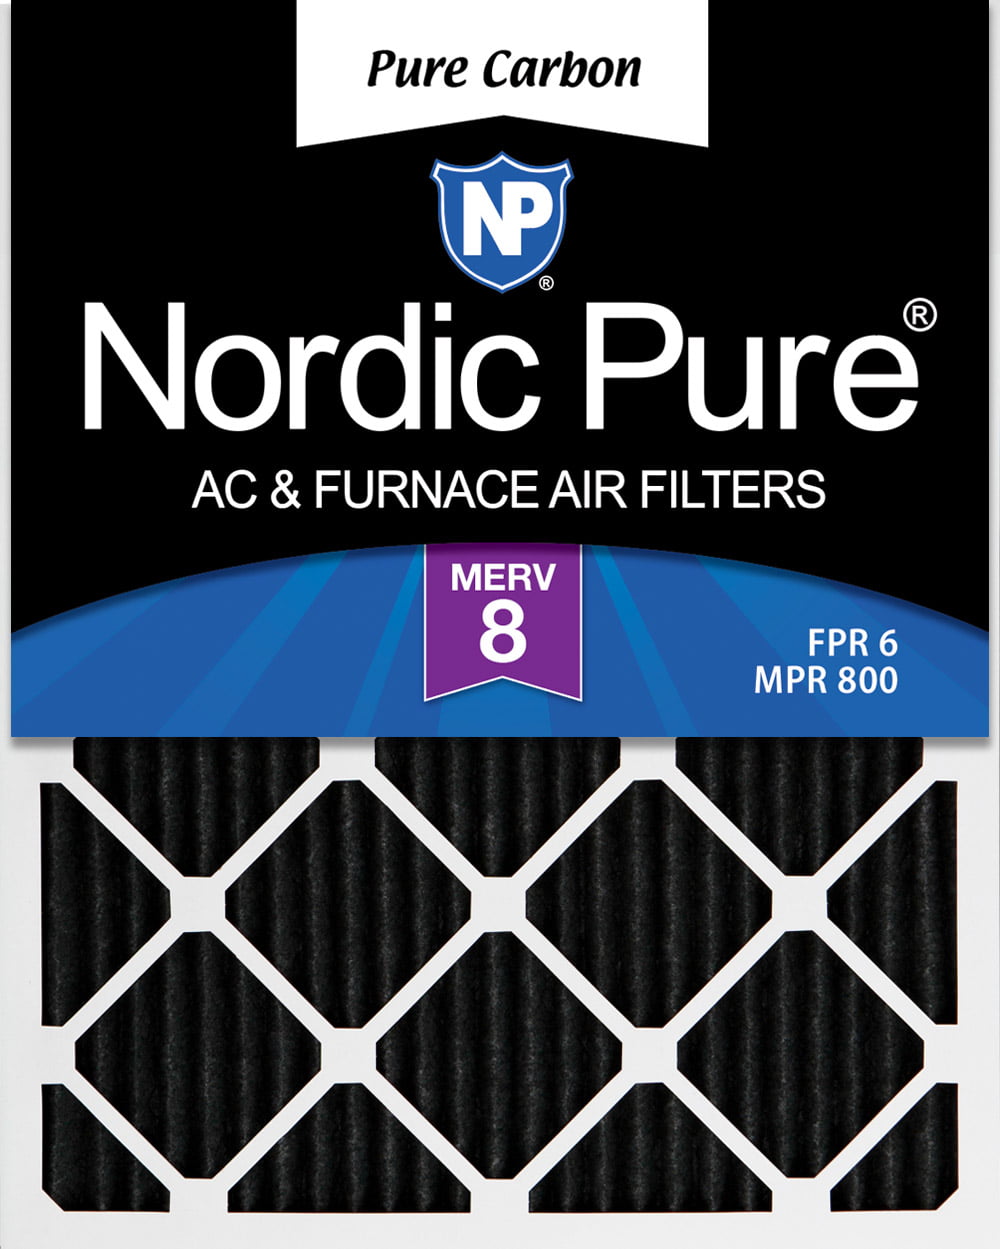 Nordic Pure 14x14x1 Pure Carbon Pleated Odor Reduction AC Furnace Air Filters 3 Pack 3 Piece